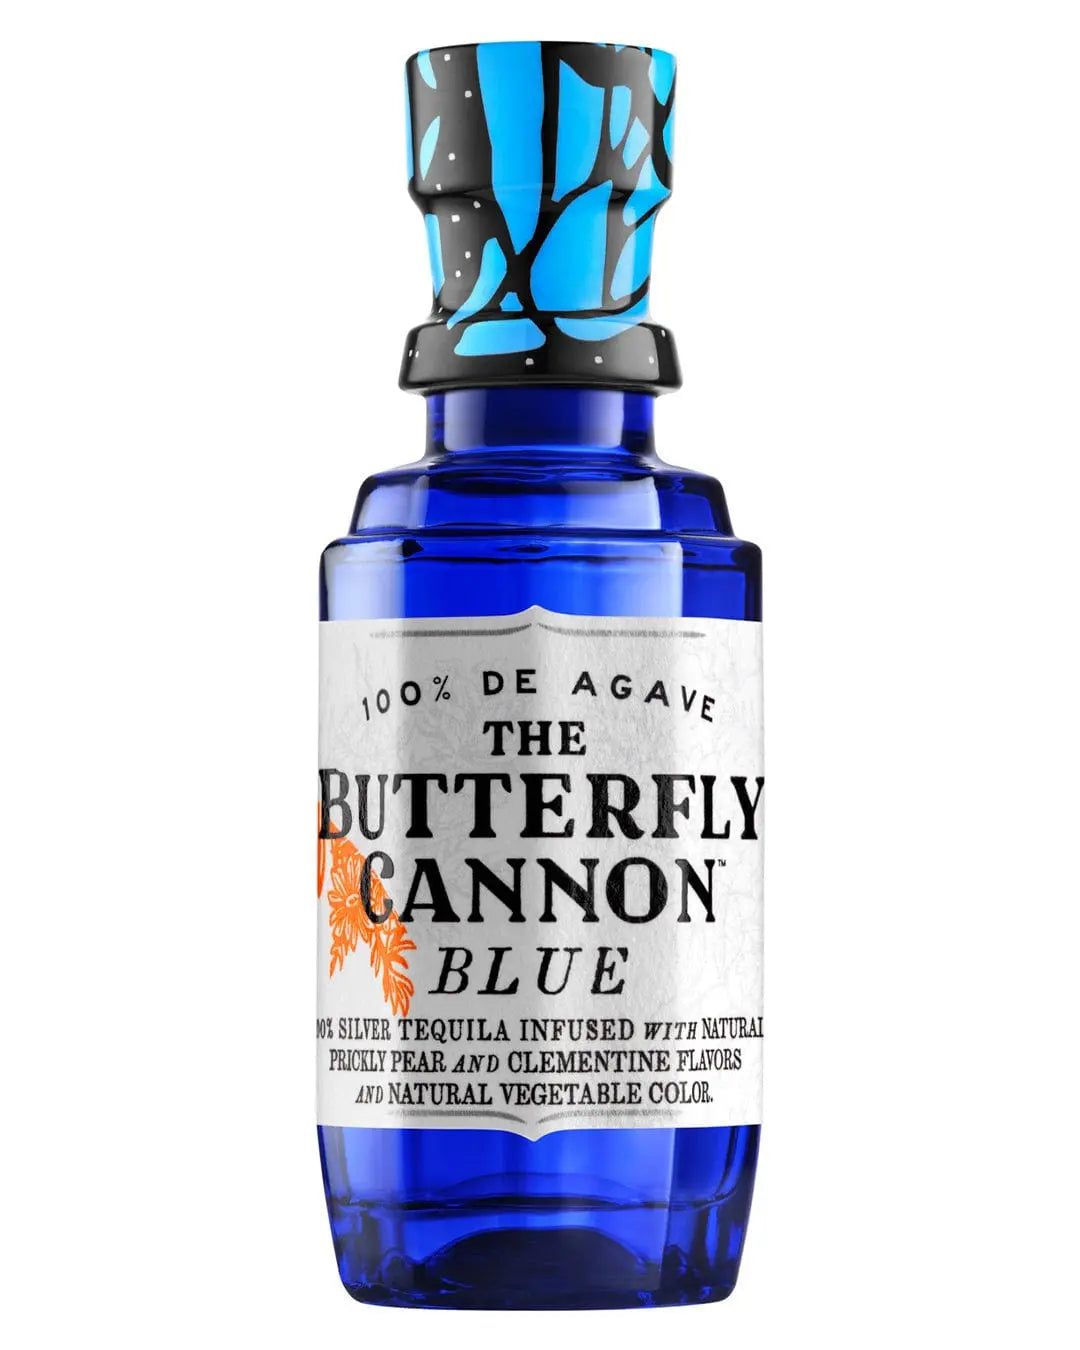 The Butterfly Cannon Blue Tequila Miniature, 5 cl Spirit Miniatures